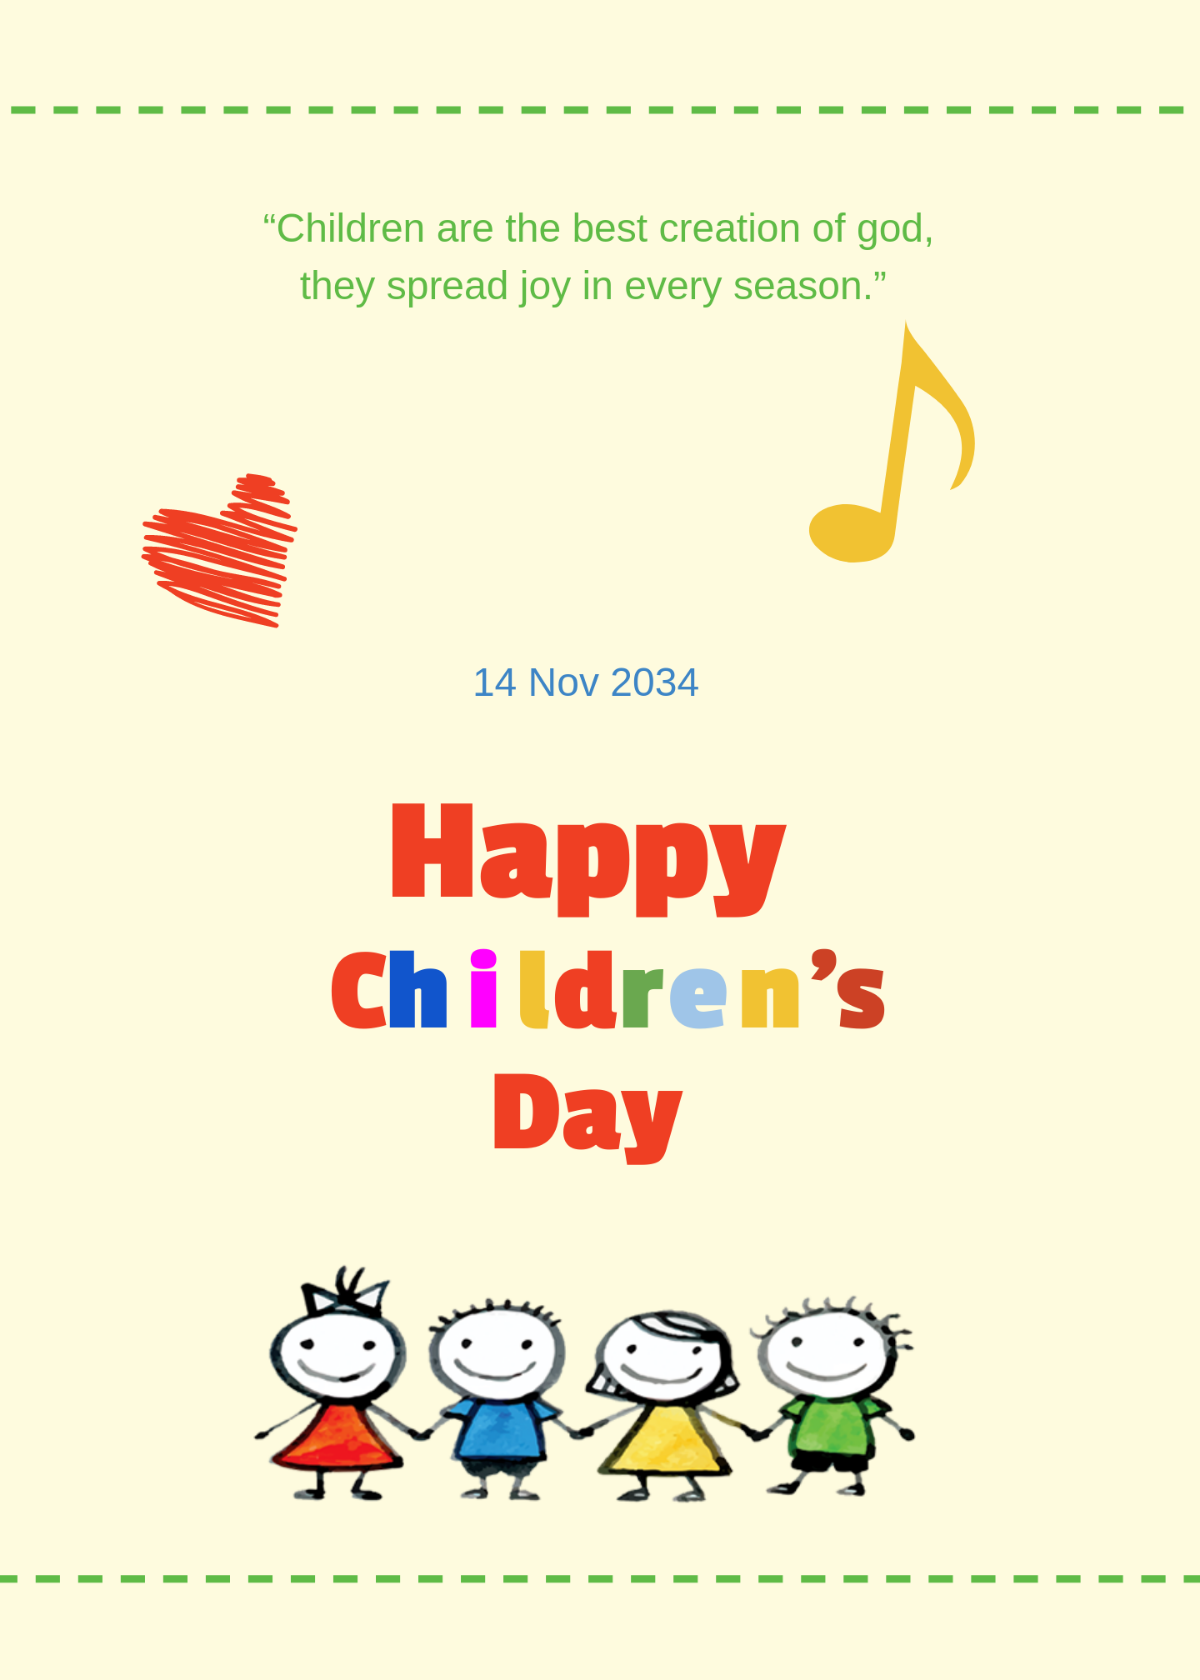 Children's Day Greeting Card Template